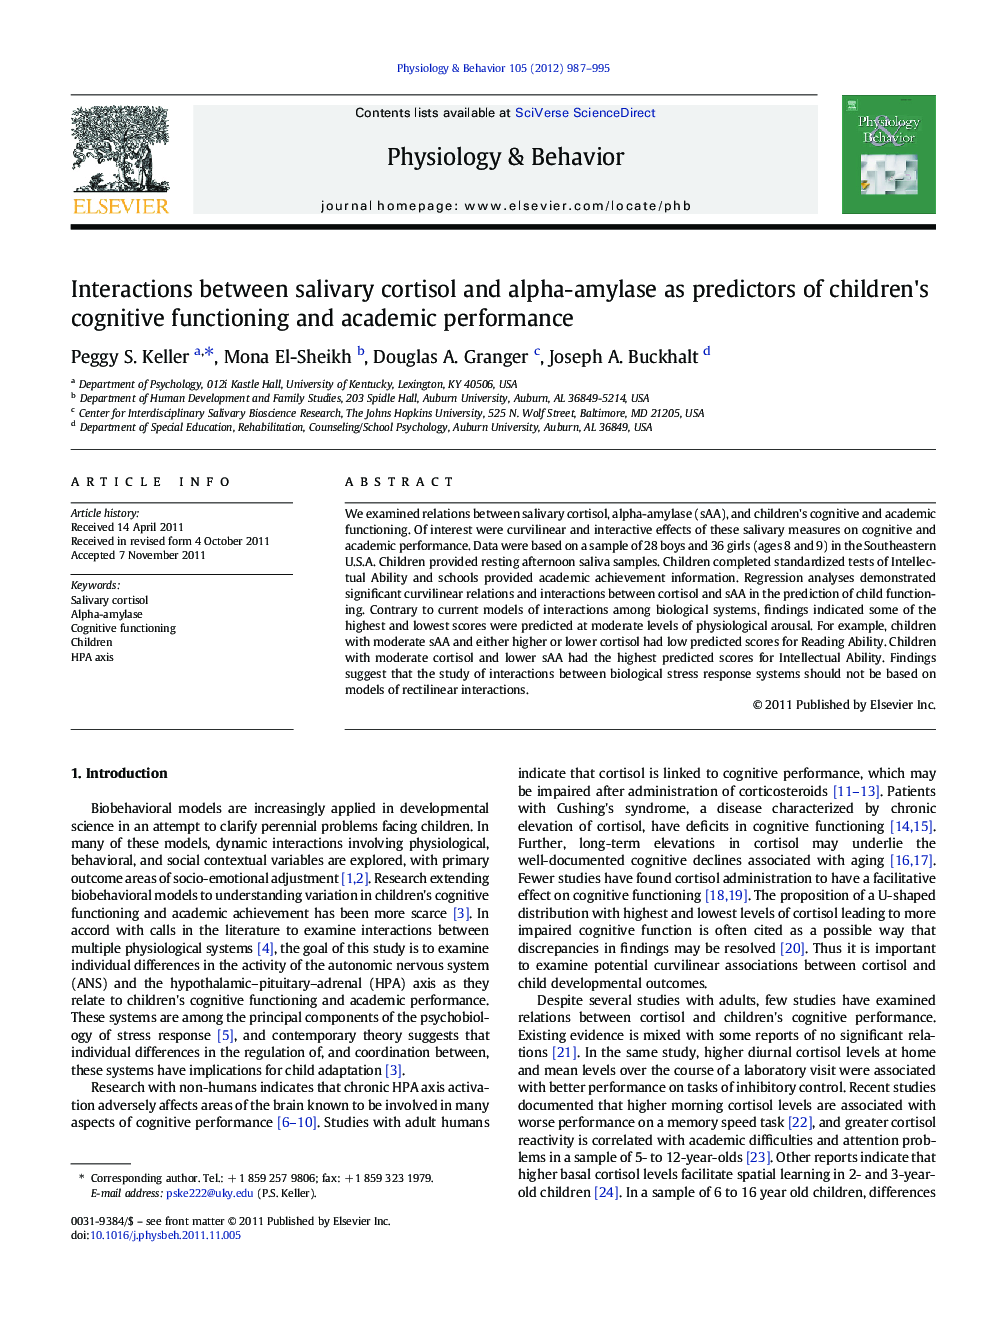 Interactions between salivary cortisol and alpha-amylase as predictors of children's cognitive functioning and academic performance